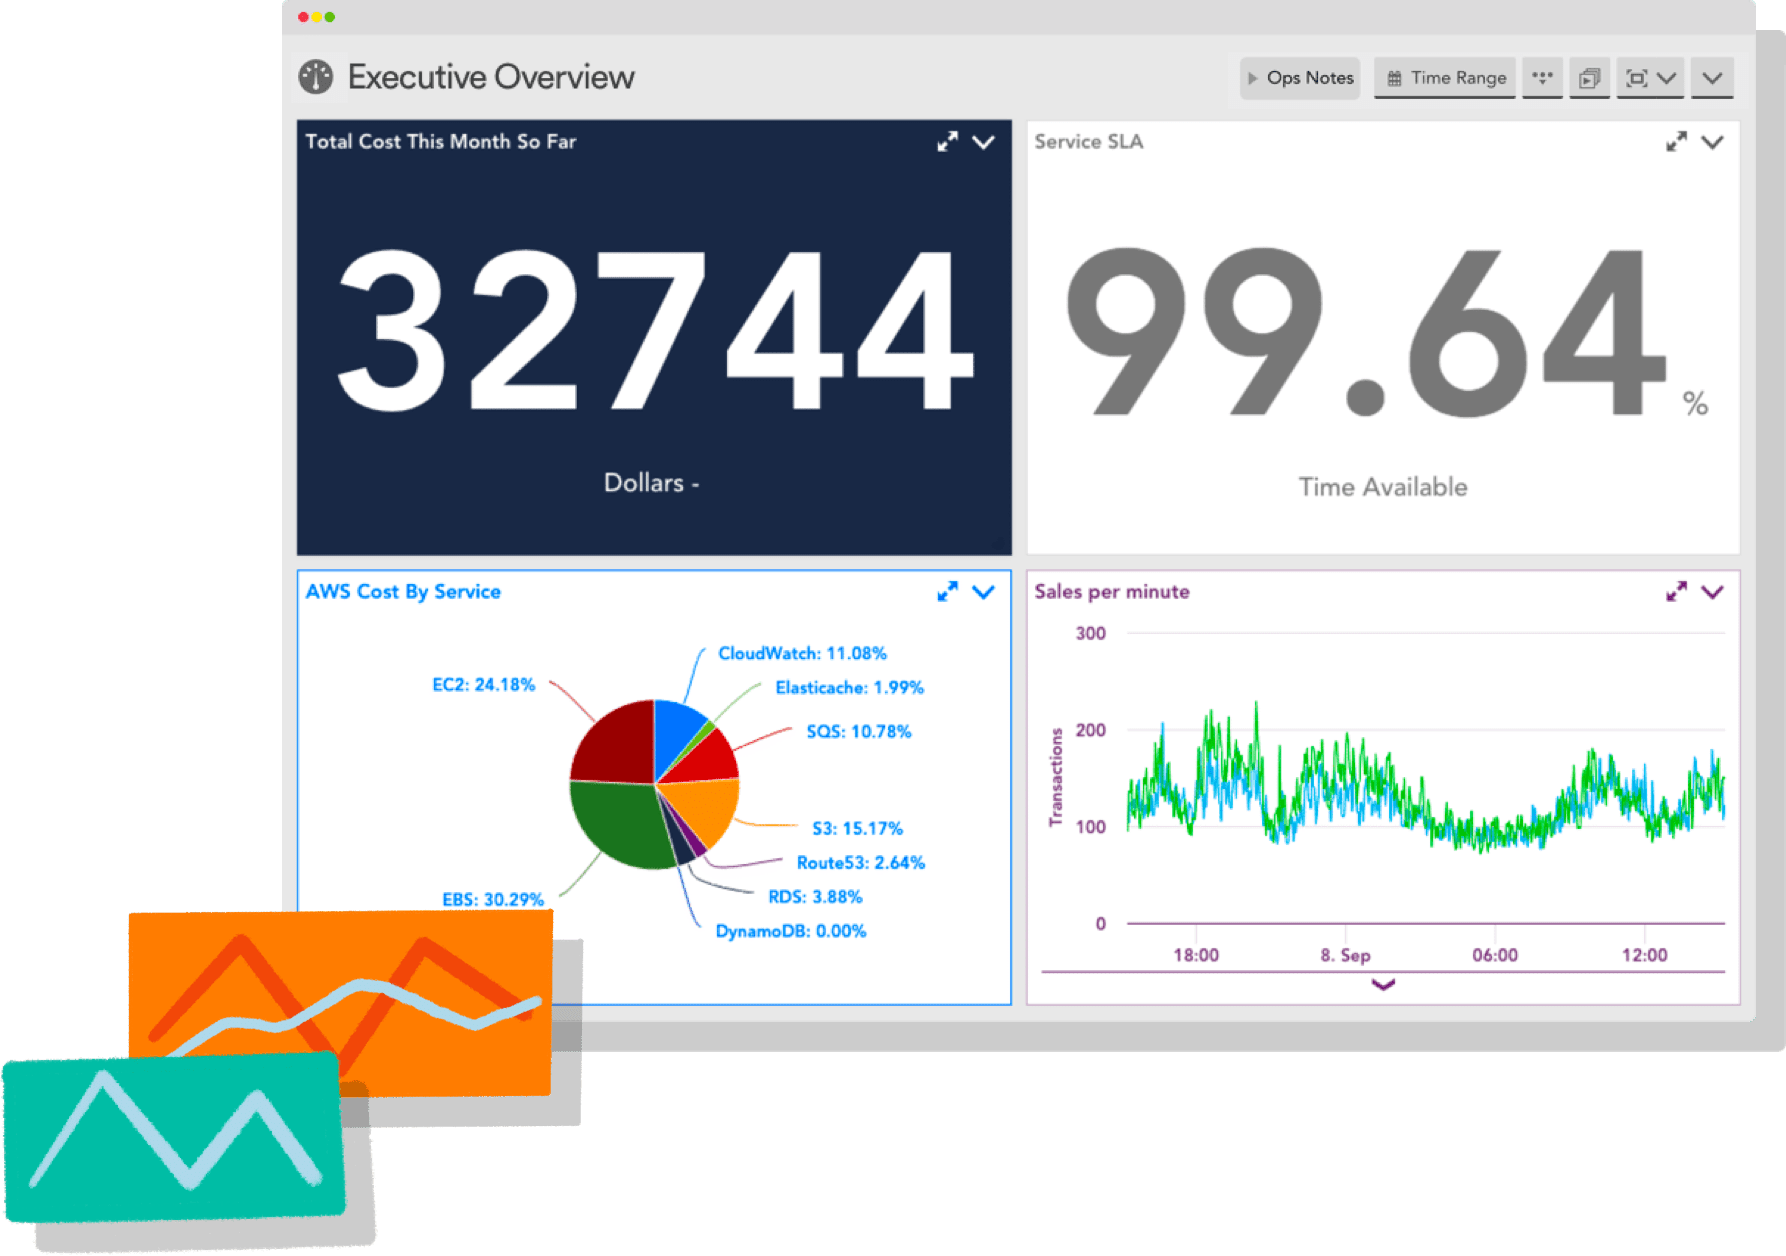 LogicMonitor executive overview dashboard featuring costs, service SLA, and sales per minute